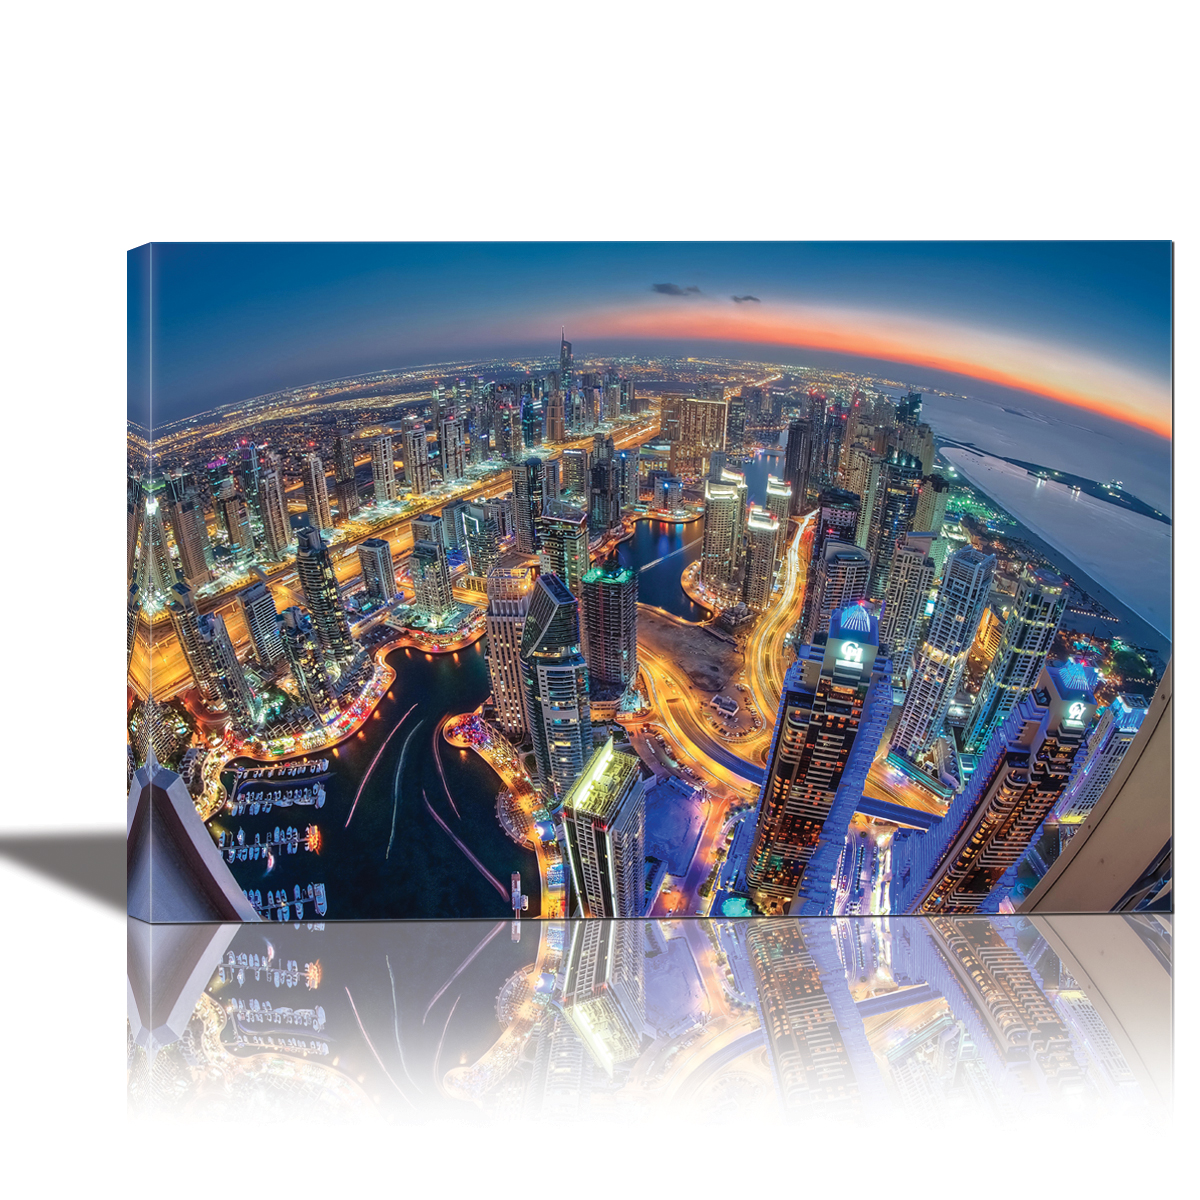 1751-94186 24 X 36 In. Dubai Colors Of Night Painting Artwork For Home Decor Framed Canvas Wall Art - Multi Color